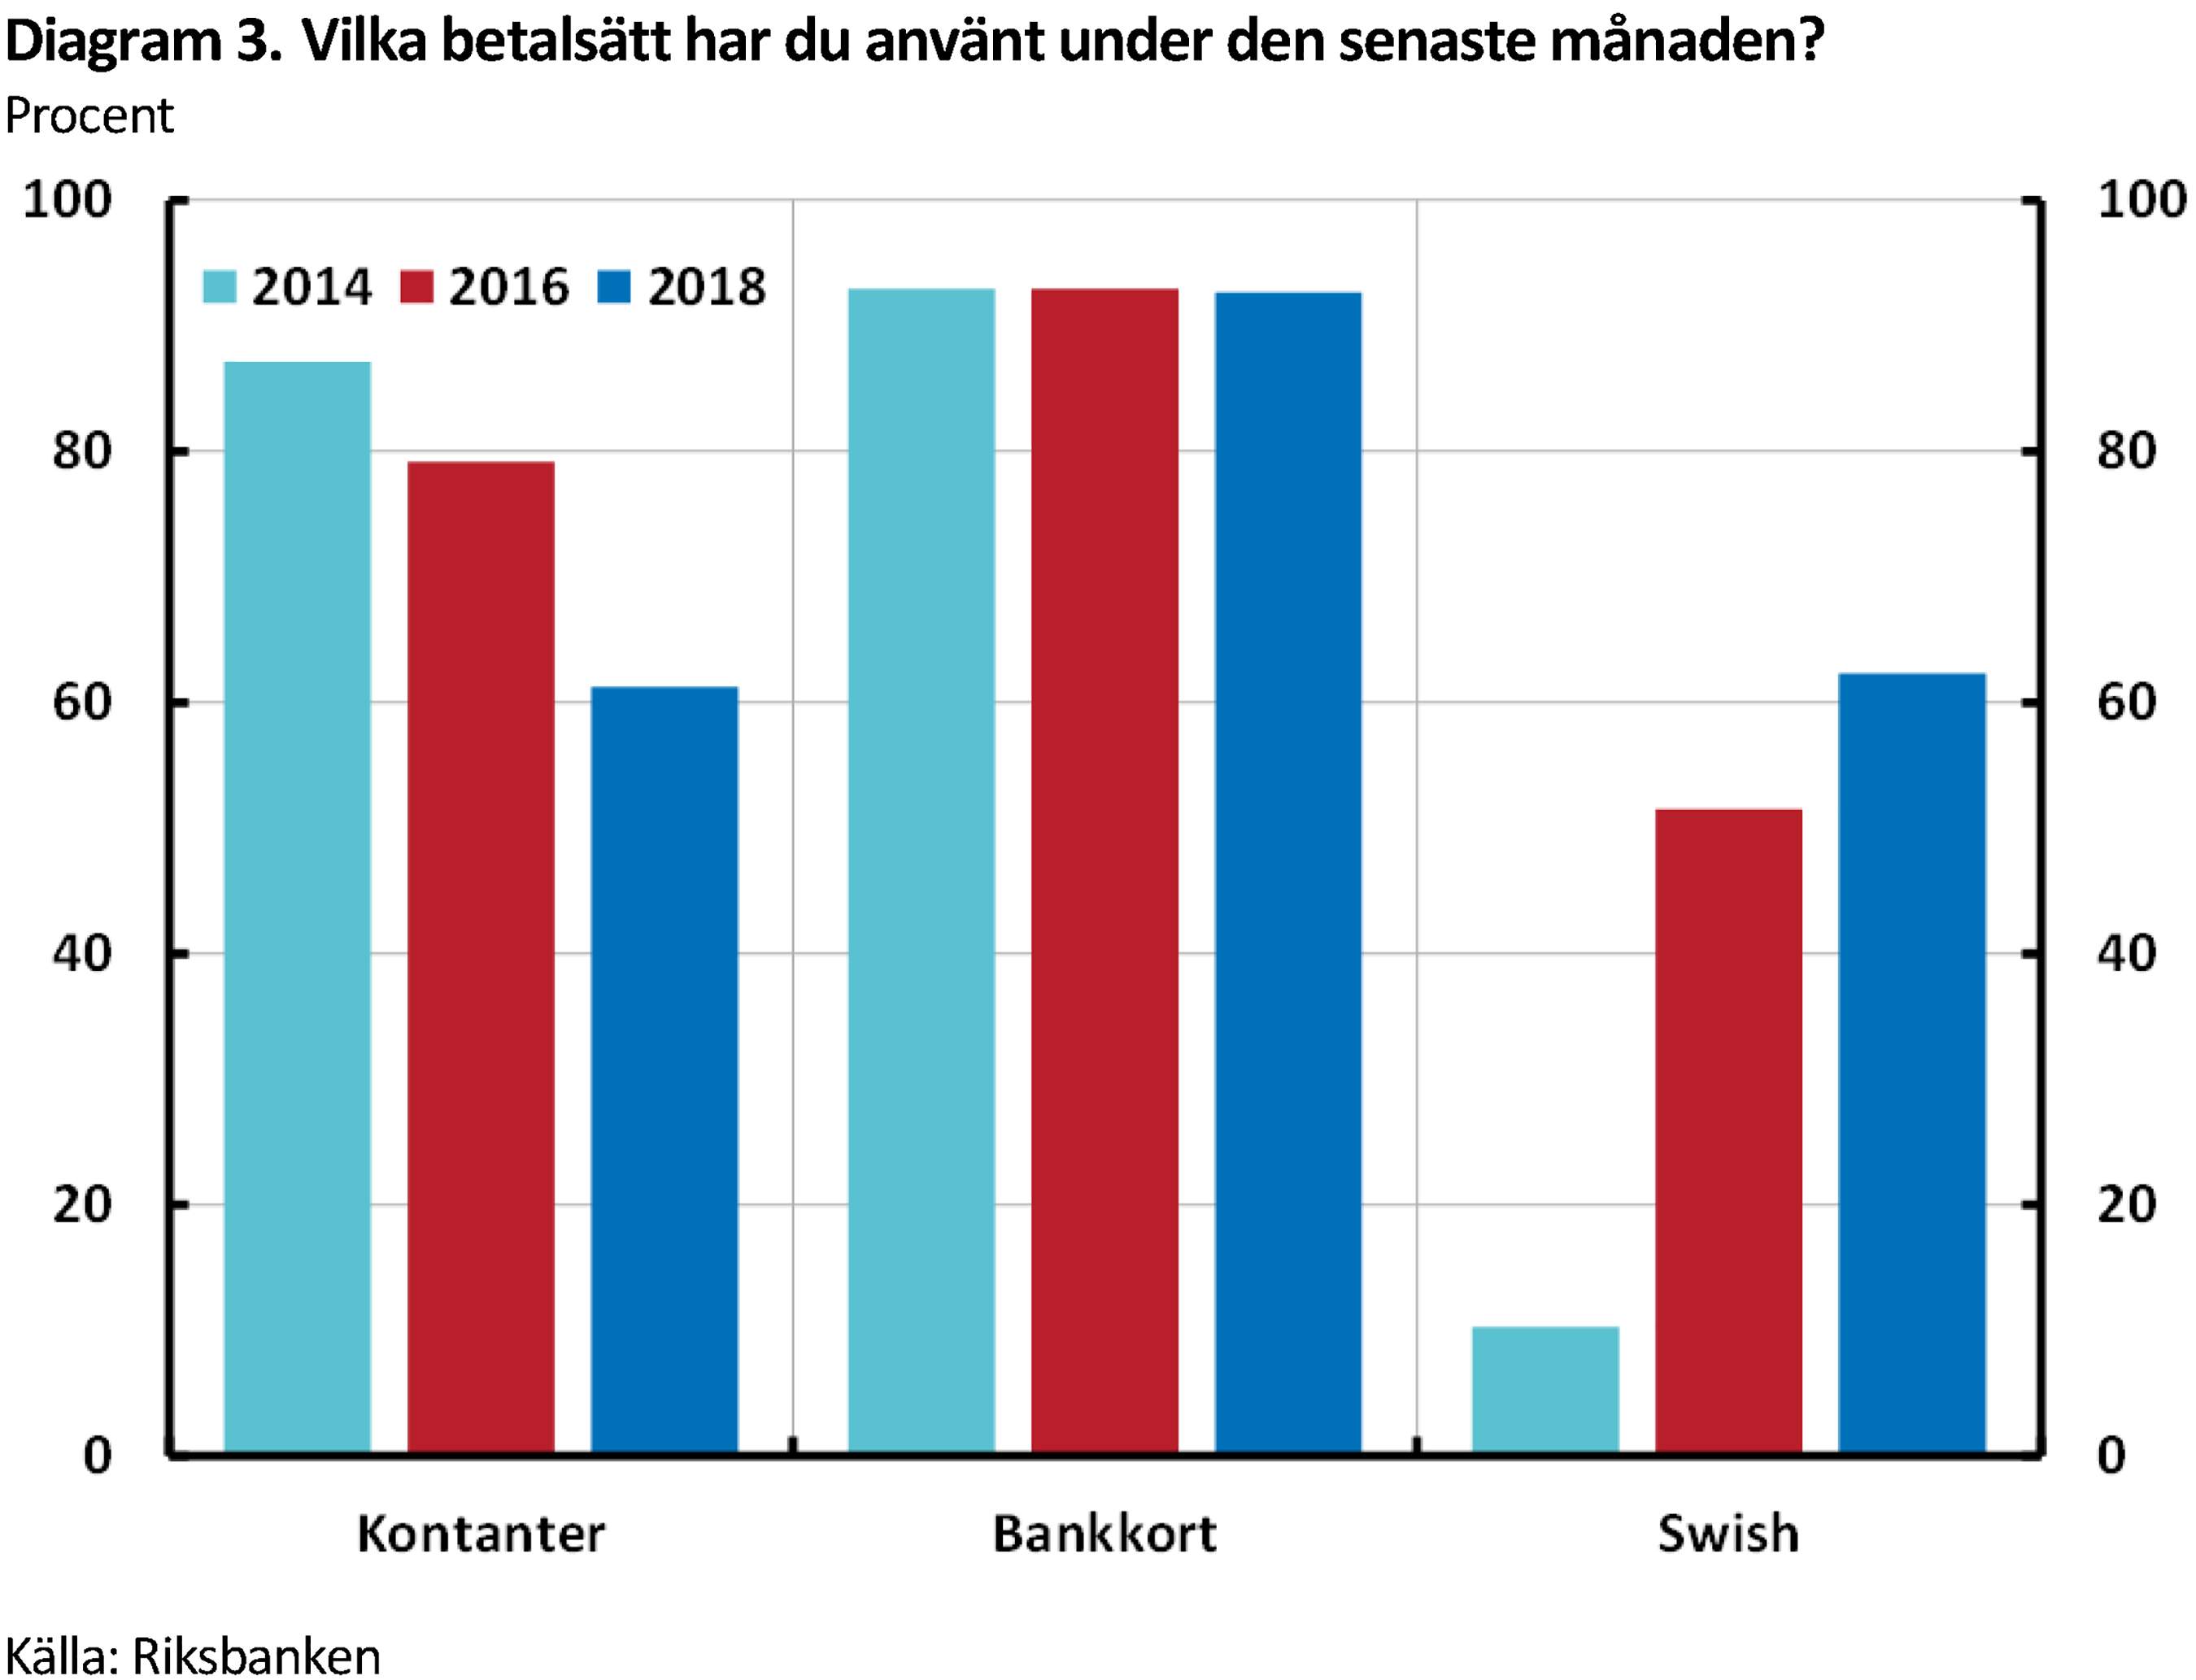 Which payment technique have you used in the past month? Kontanter (cash), Bankkort (debit/credit cards), Swish. Graph from Sveriges Riksbank (2018).